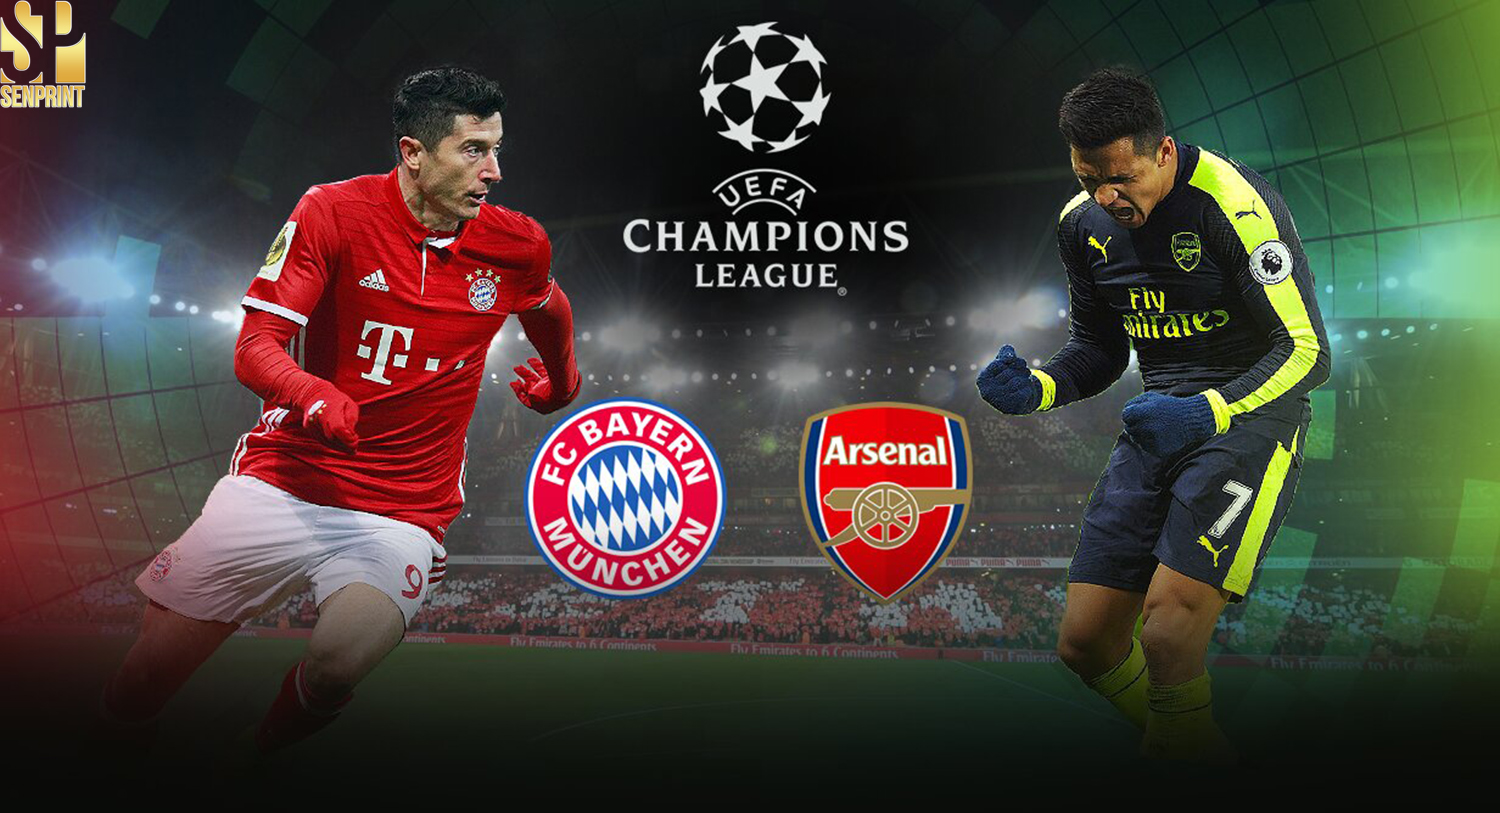 Bayern's Dominance Hangs Over Arsenal – Can History Be Rewritten